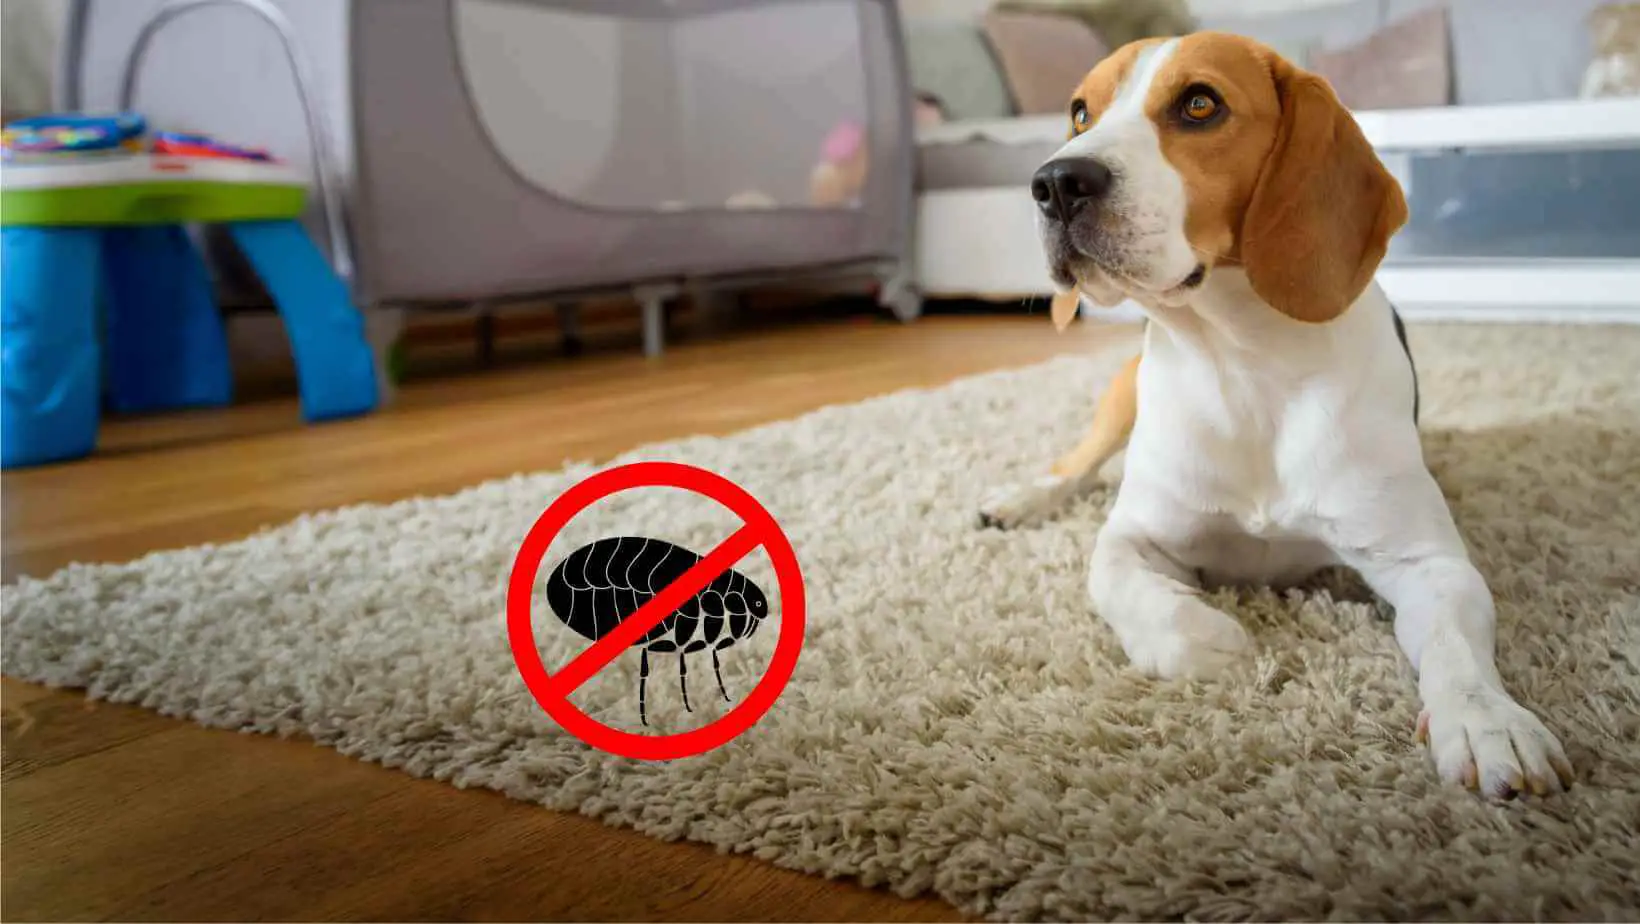 Does Carpet Cleaning Kill Fleas